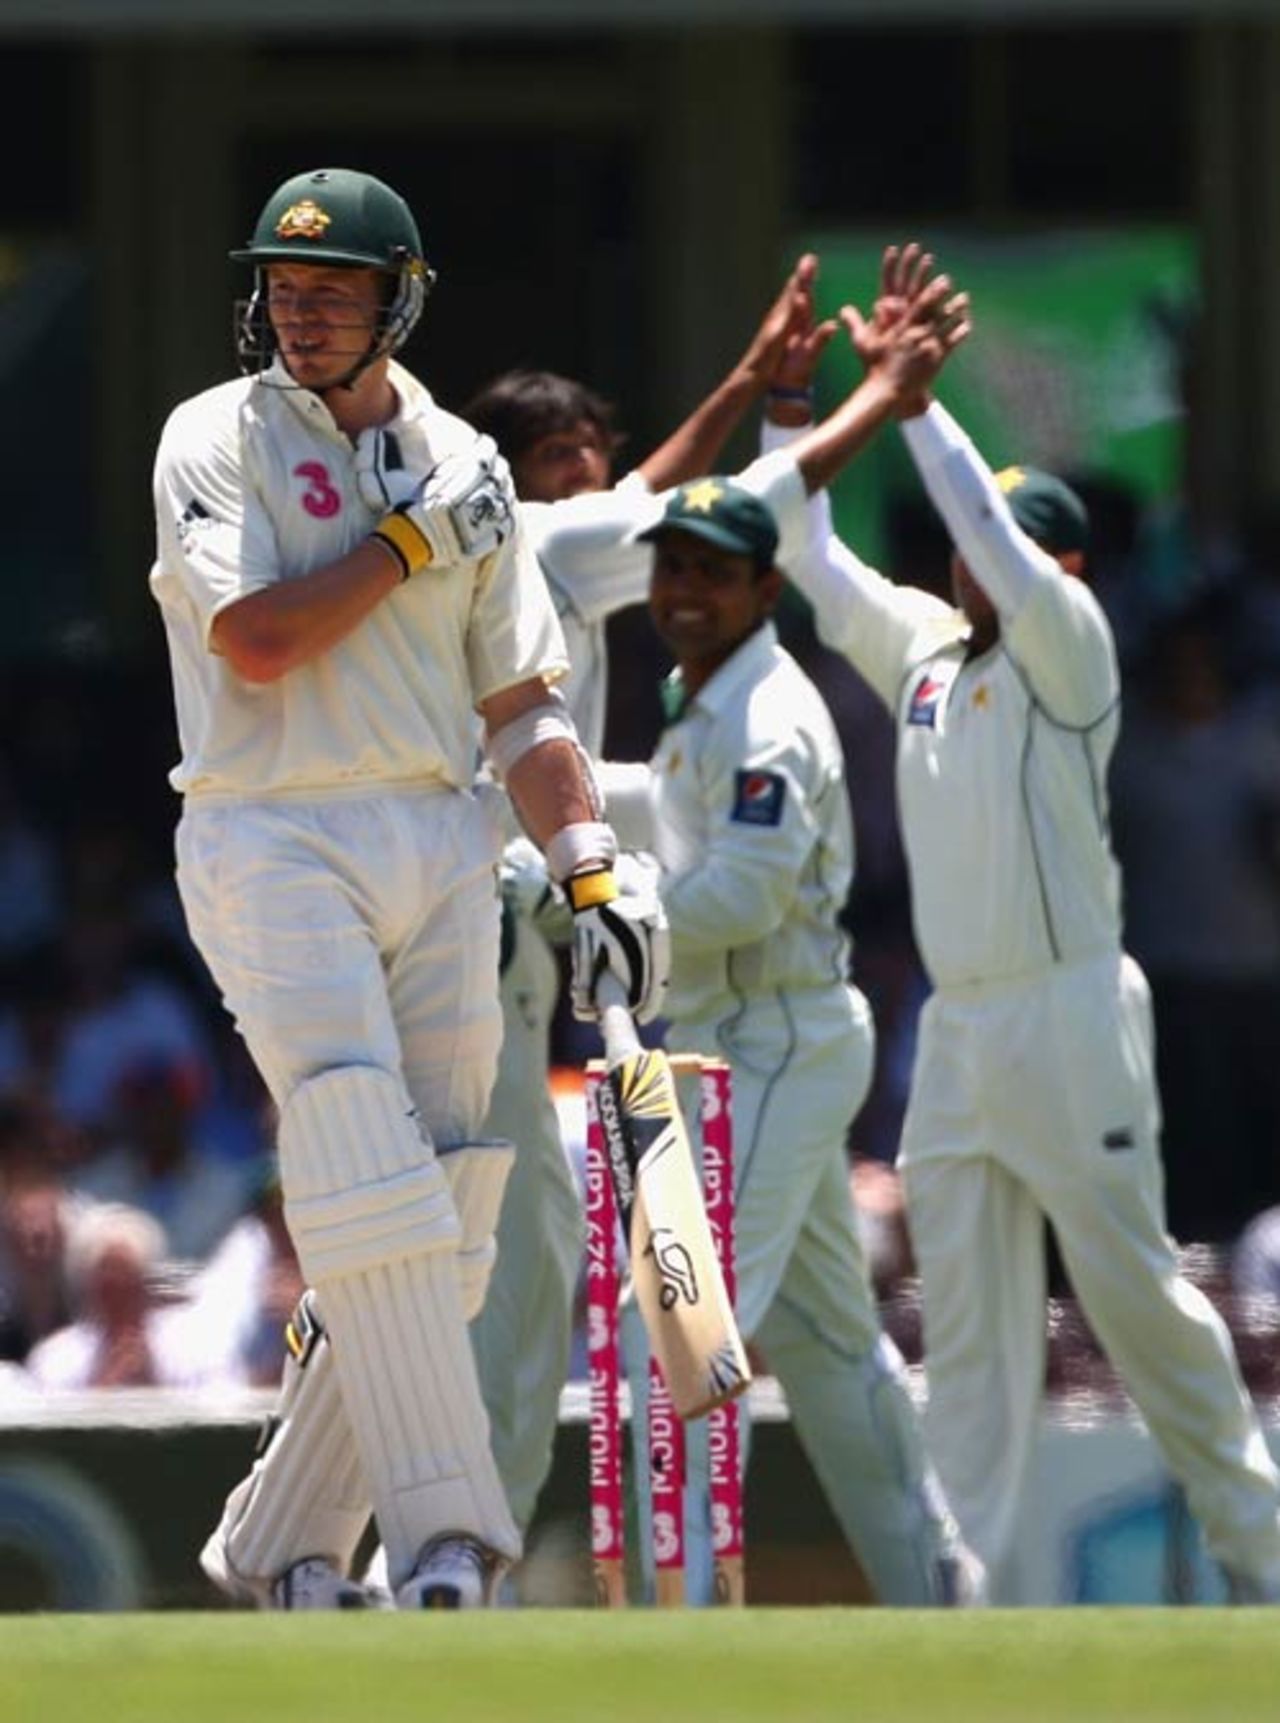 Peter Siddle holds his shoulder after being struck and caught behind from the same ball, Australia v Pakistan, 2nd Test, Sydney, 4th day, January 6, 2010